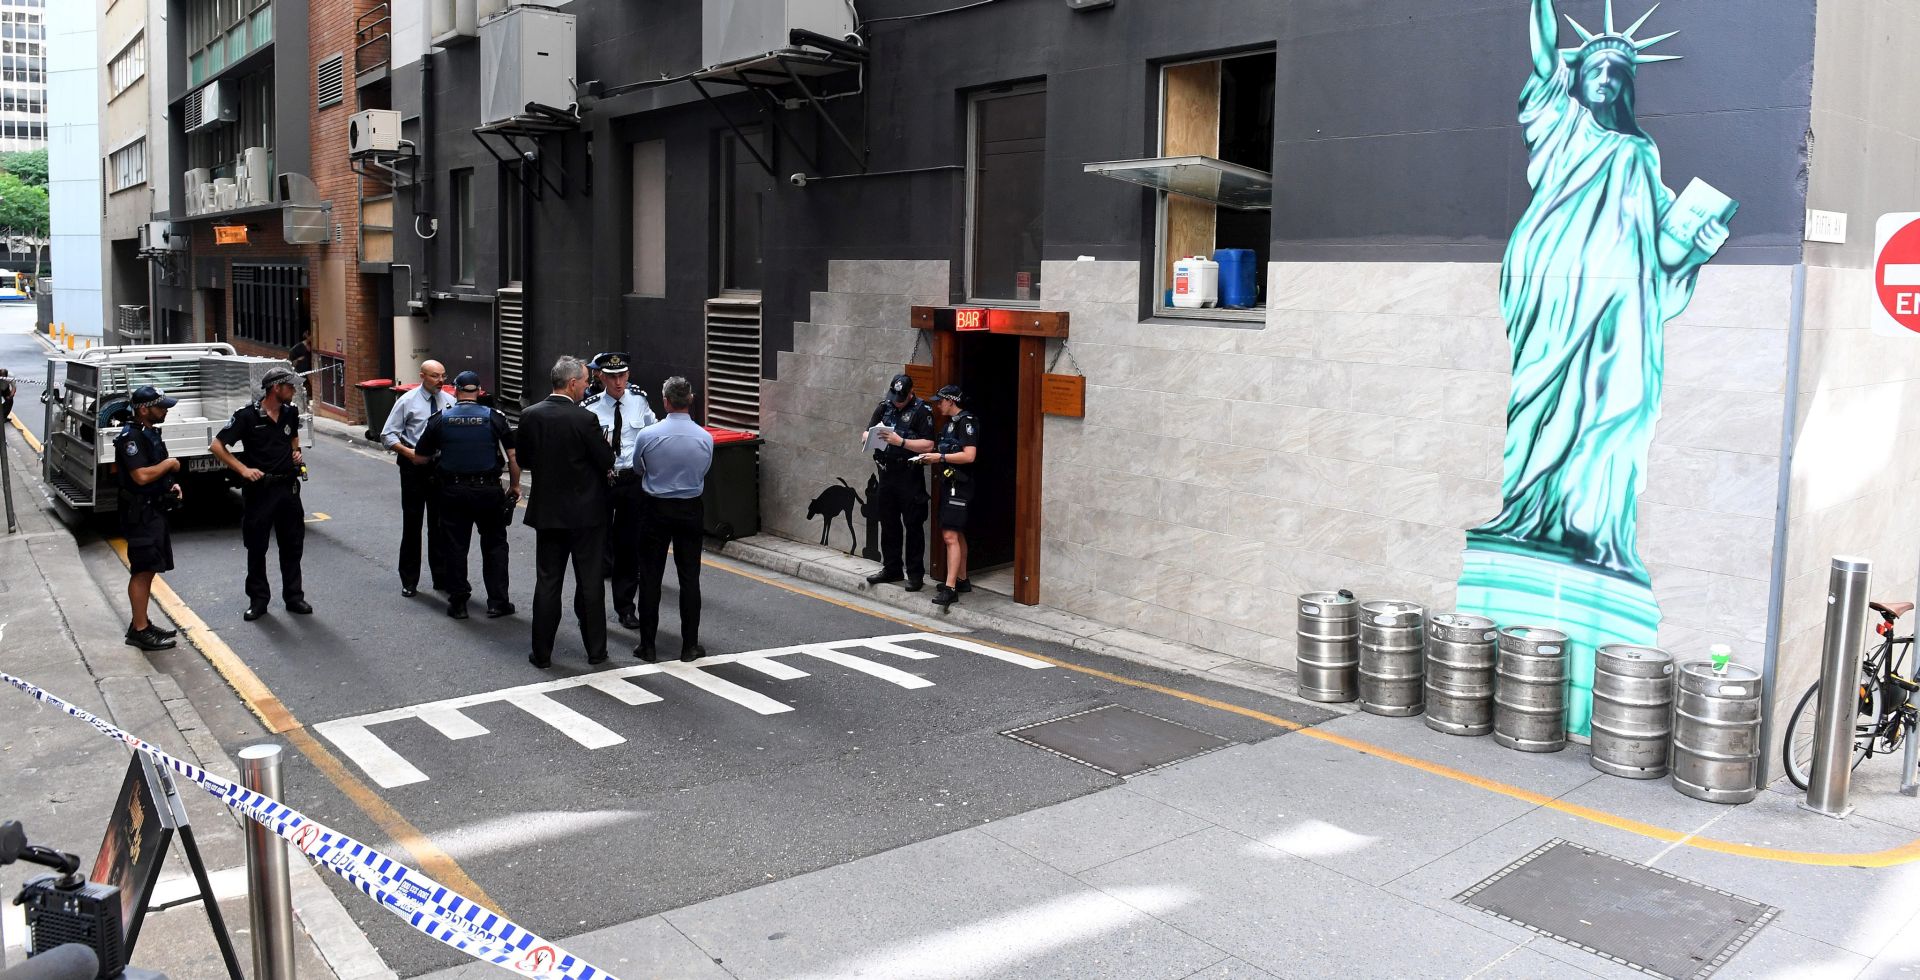 epa05743414 Police officers are seen at a cordoned off area after a man was accidentally shot in Eagle Lane in Brisbane's central business district, Queensland, Australia, 23 January 2017. According to reports, an actor, in his 20s, died from his injuries after he was shot on the set of a music video for an Australian band at a bar in Brisbane. The filming of the scene reportedly involved a discharge of firearms. According to the police, the shooting was accidental and the public was not at risk.  EPA/DAVE HUNT  AUSTRALIA AND NEW ZEALAND OUT